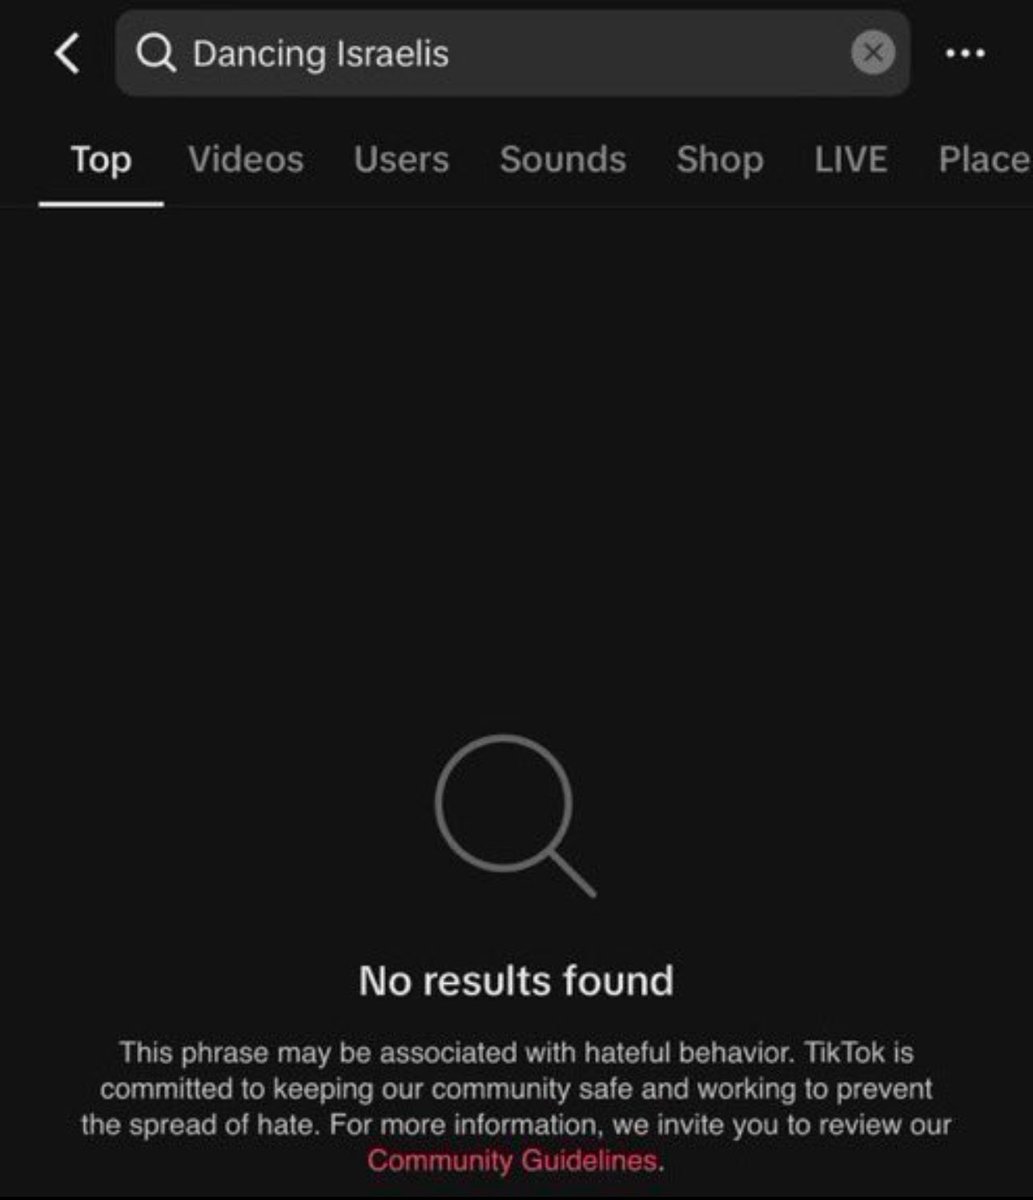 TIKTOK HAS THE SEARCH DANCING ISRAELIS BANNED

But the Zionist still want it banned as they can’t control the Palestine narrative